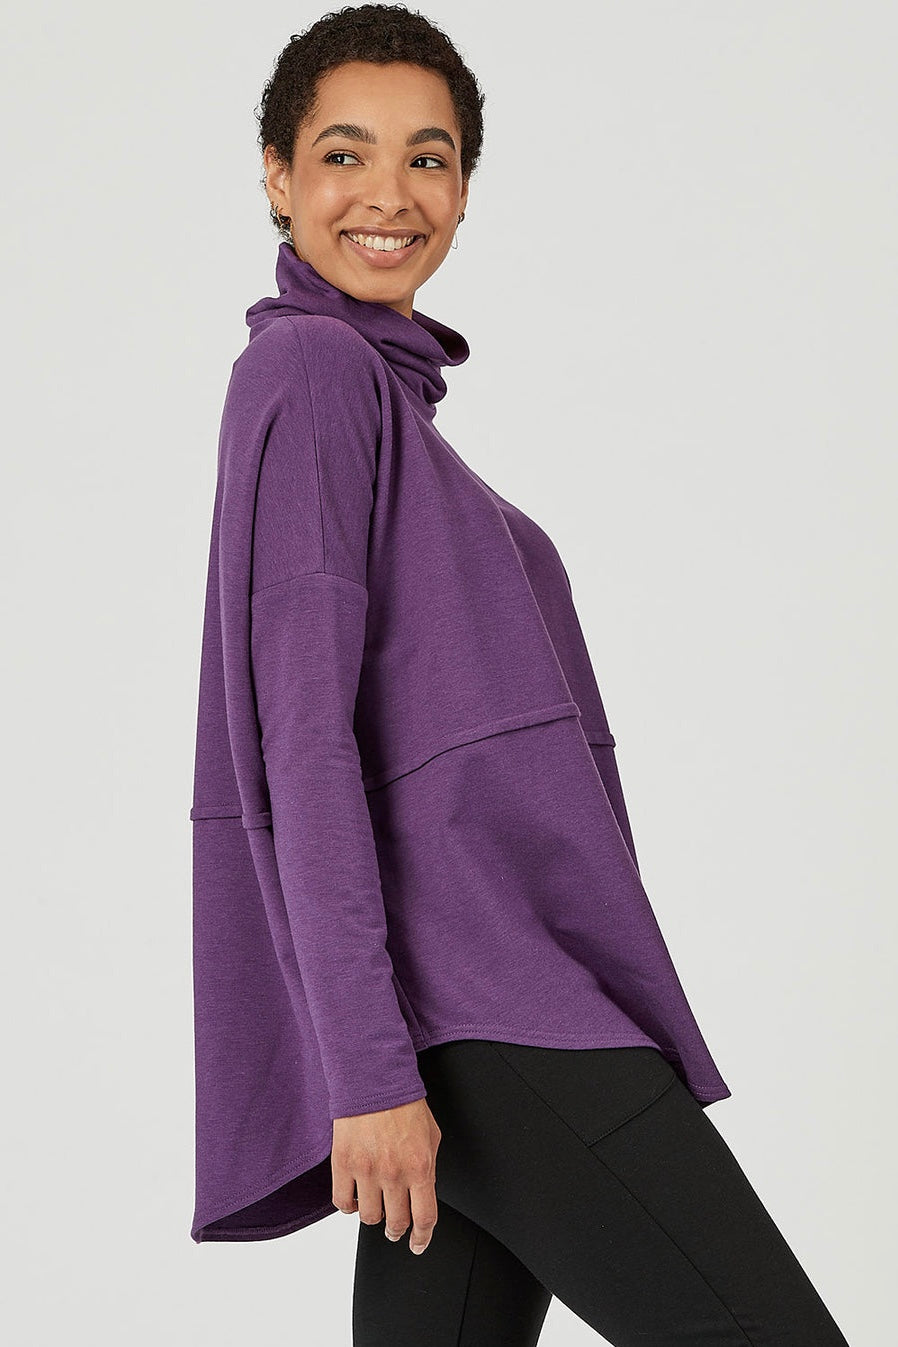 Abigail Turtleneck by Advika, Amethyst, tunic, rounded hem, stitching at waist, sizes S-XXL, made in Canada